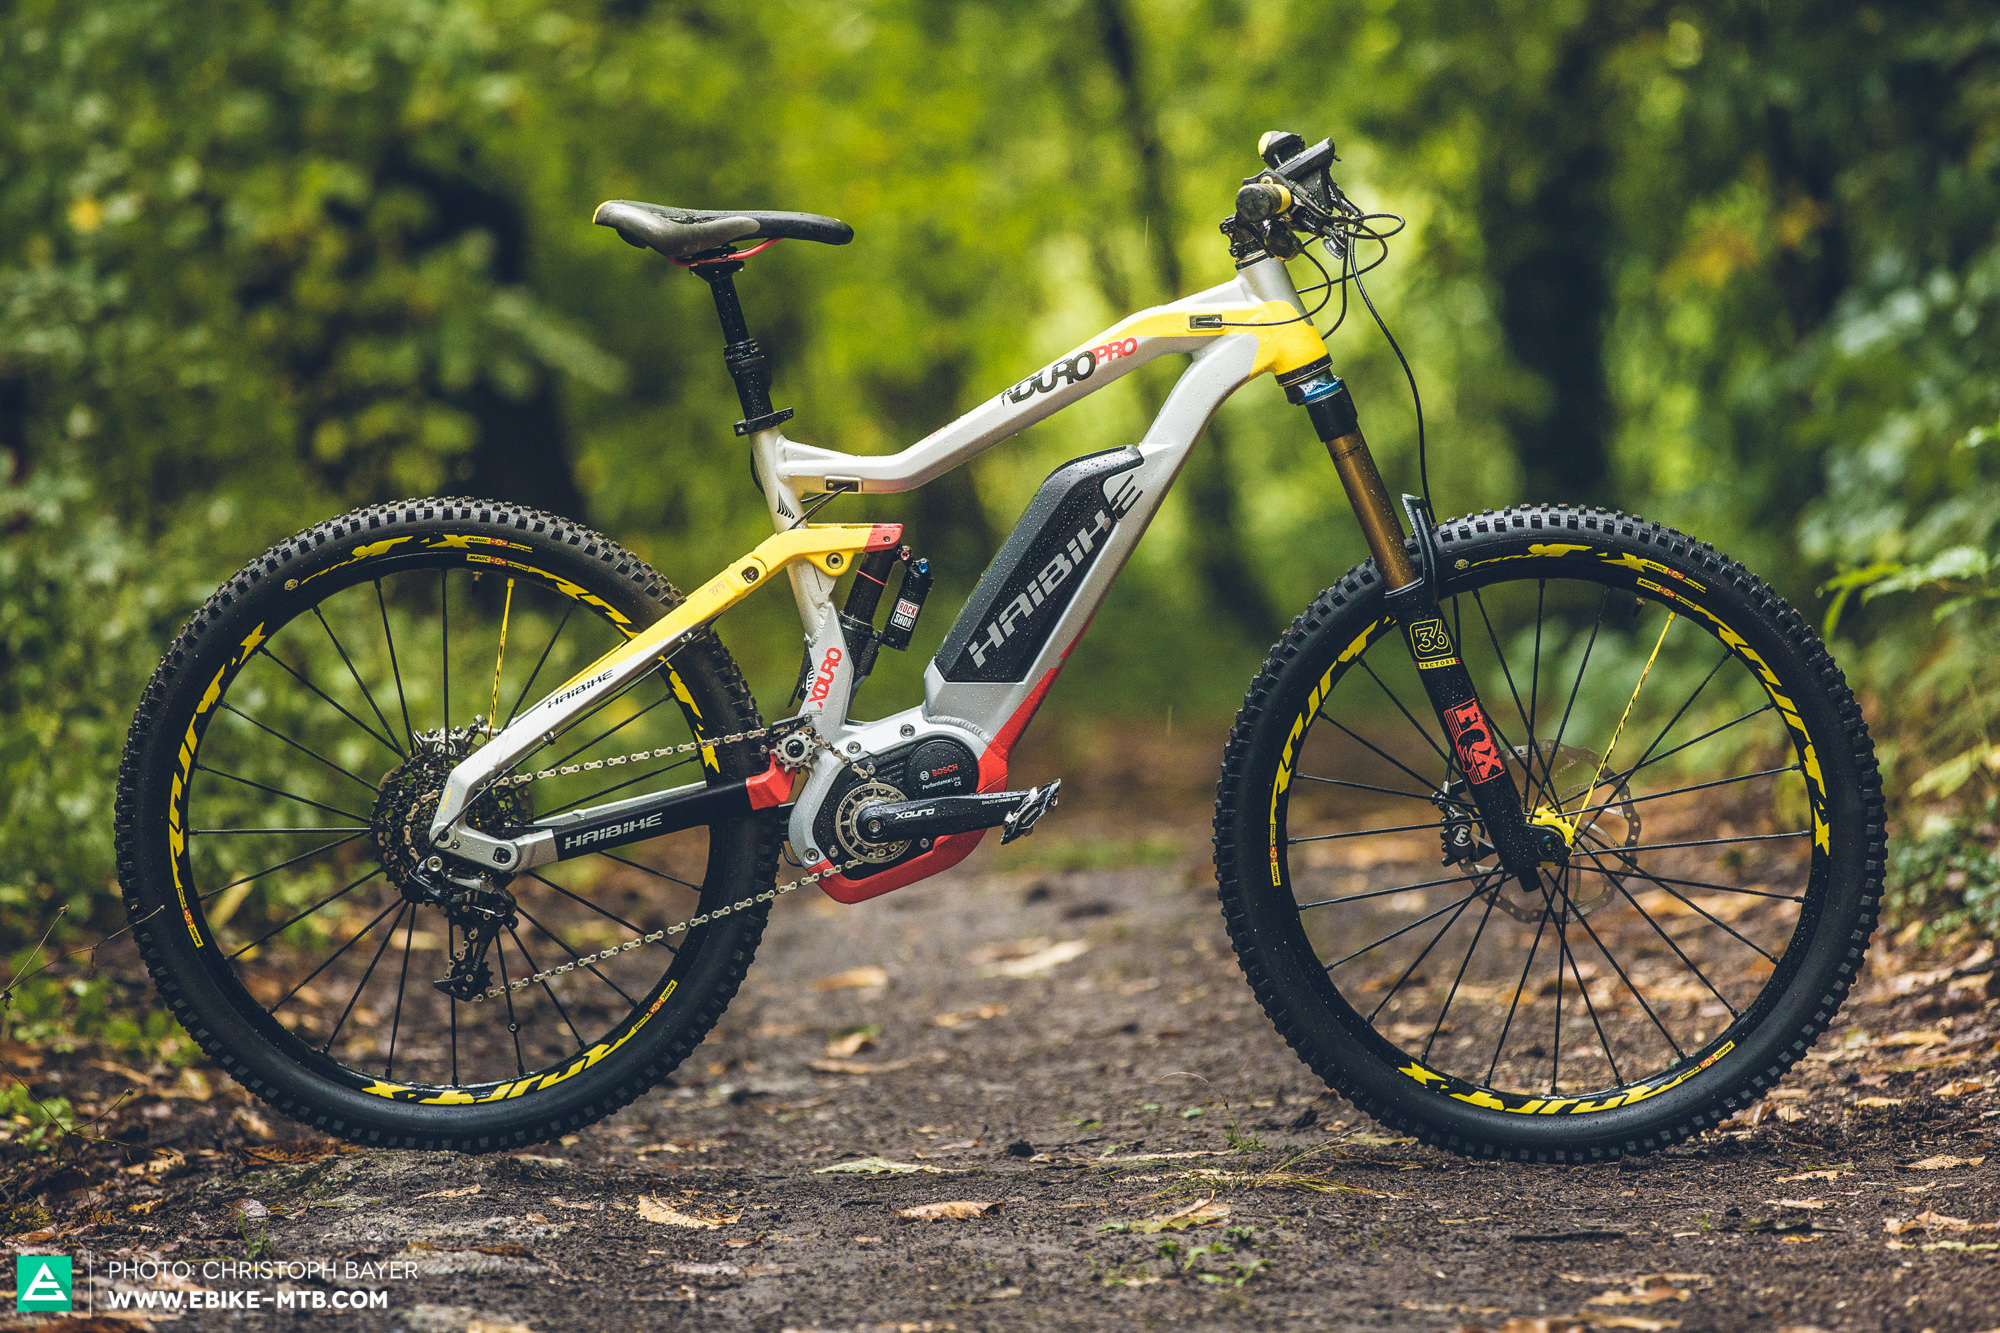 How to choose the best mountain bike